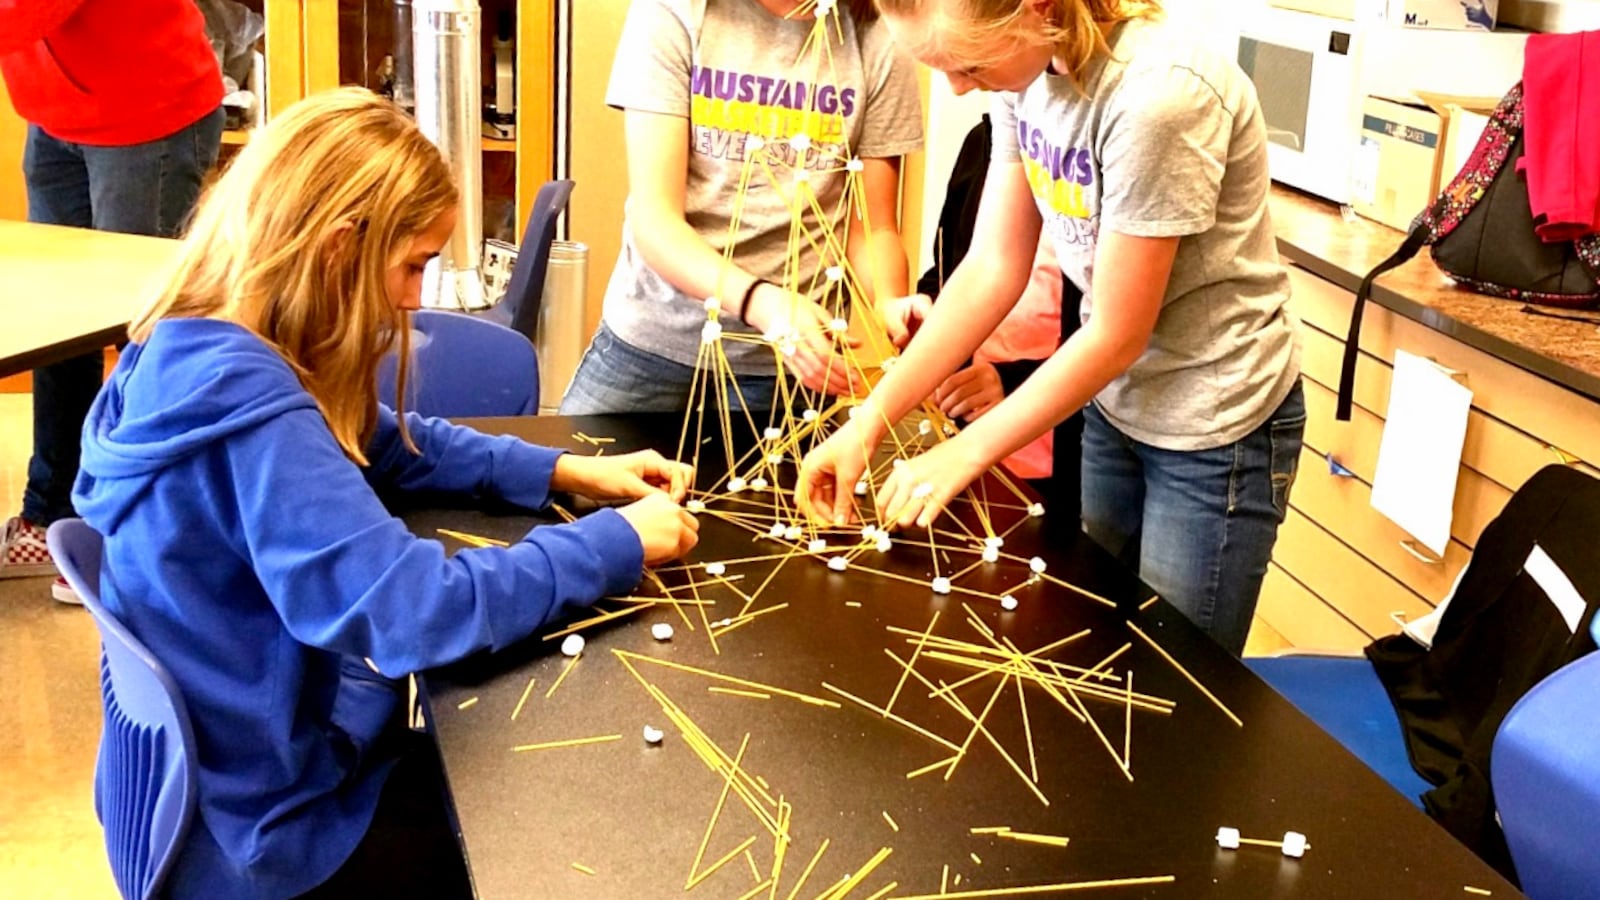 Students build a marshmallow tower as part of an activity at the Colorado AeroLab in Kremmling. The nonprofit provides a variety of "fifth-day" academic enrichment activities for students attending schools with only four-day weeks.